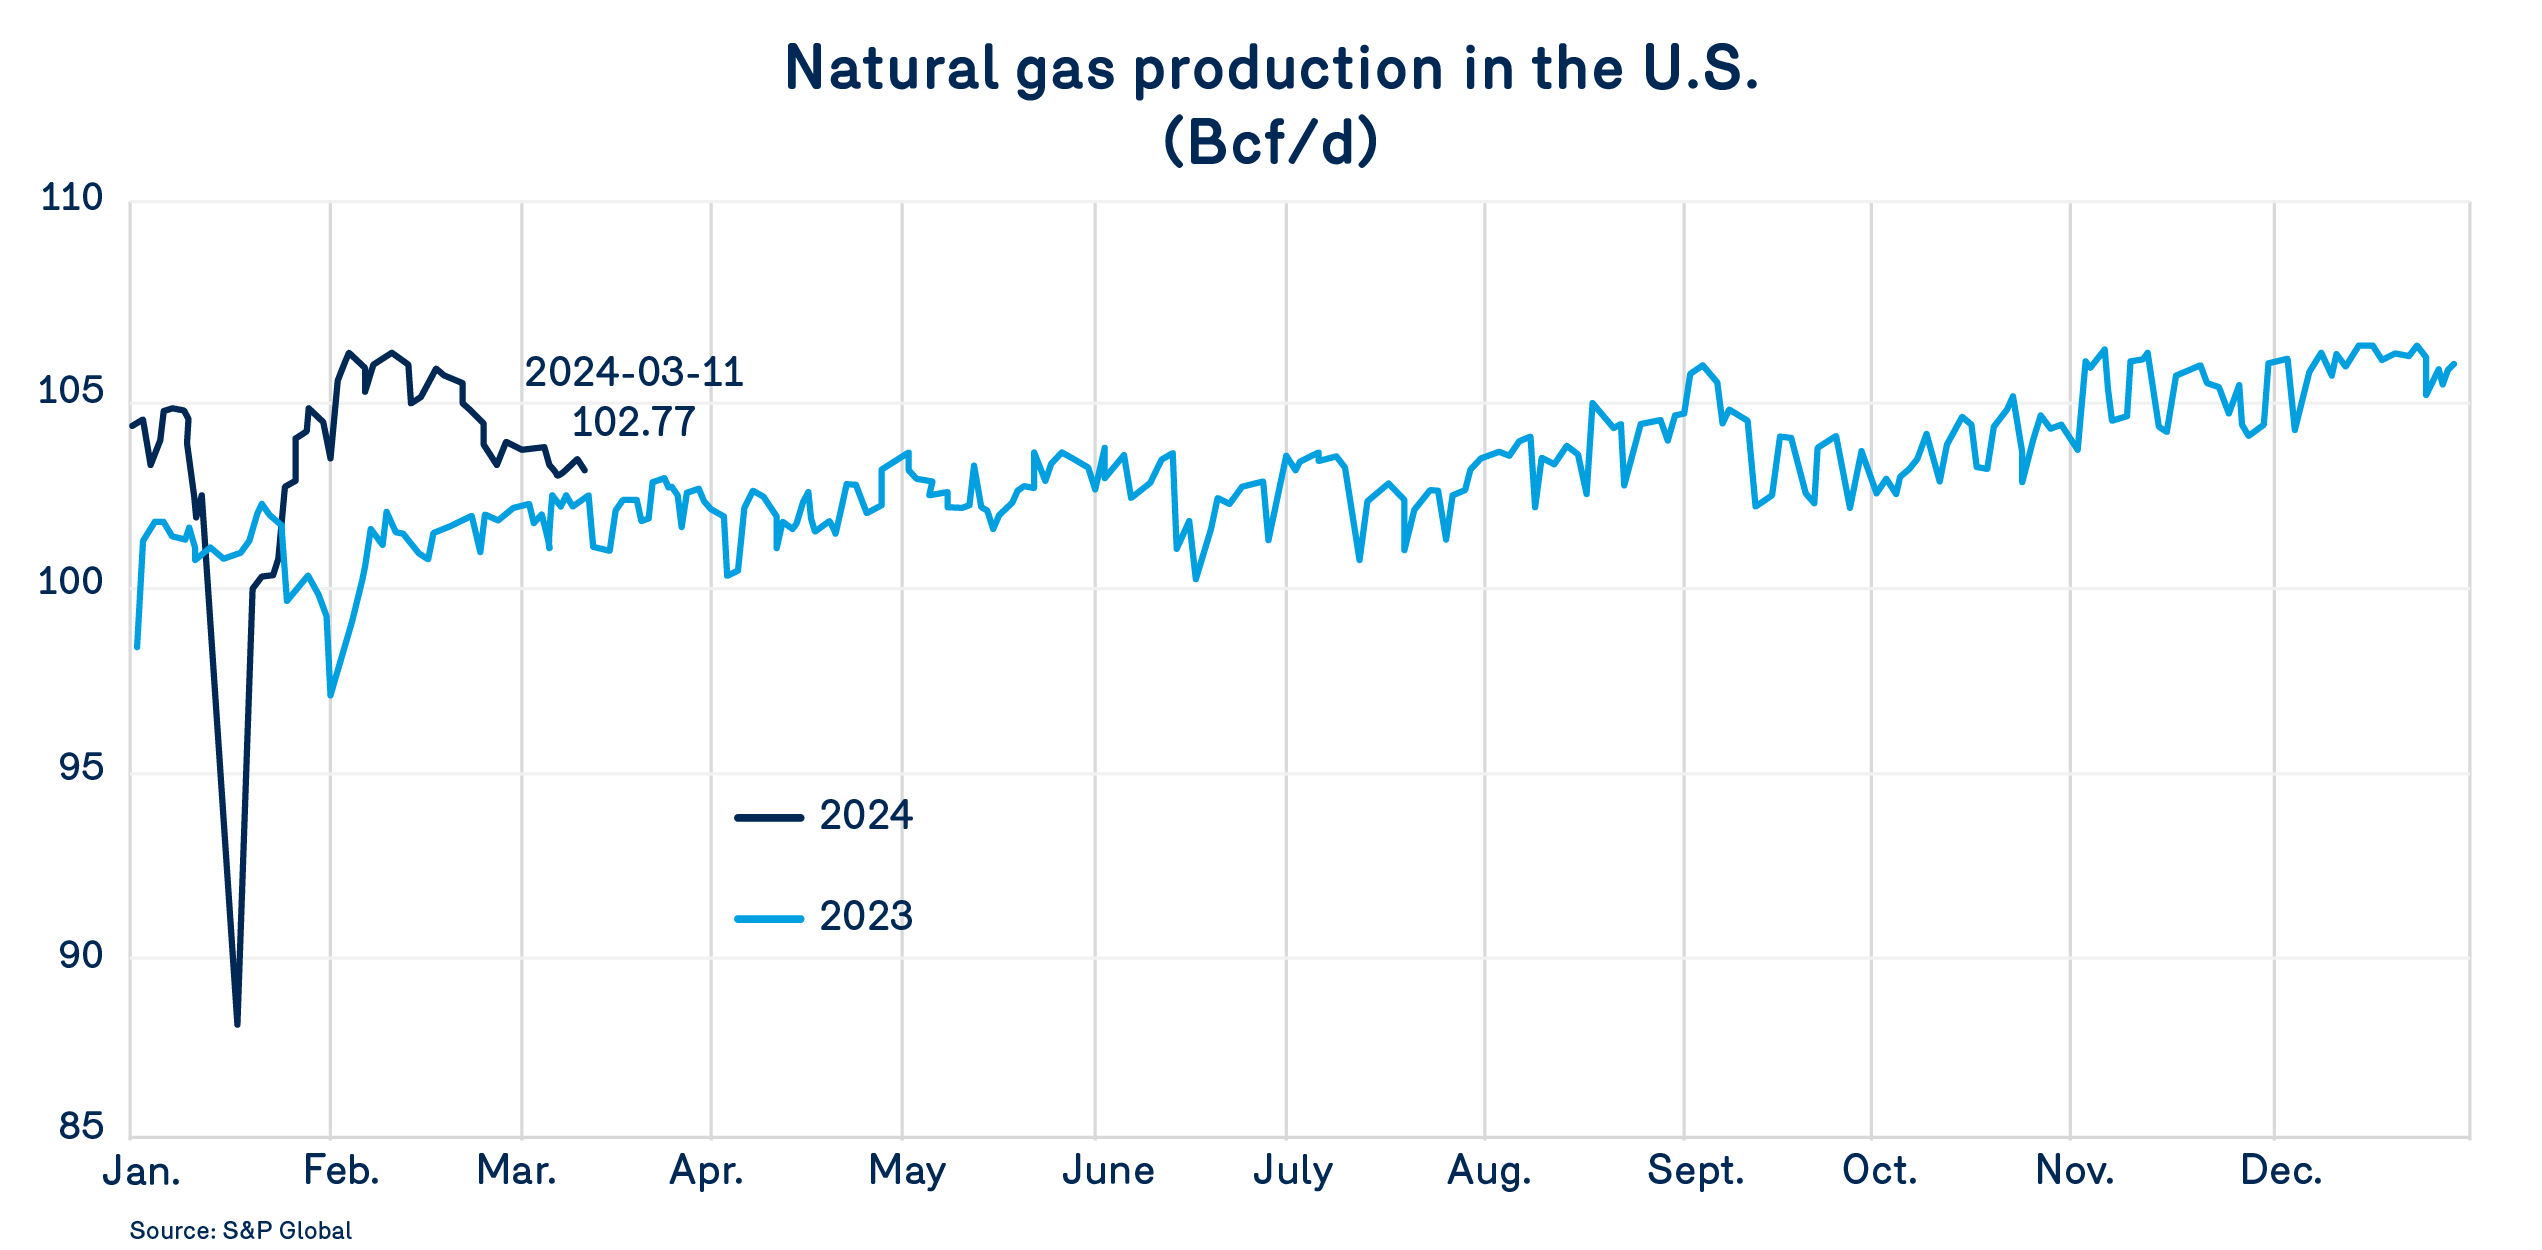 Natural gas production in the U.S